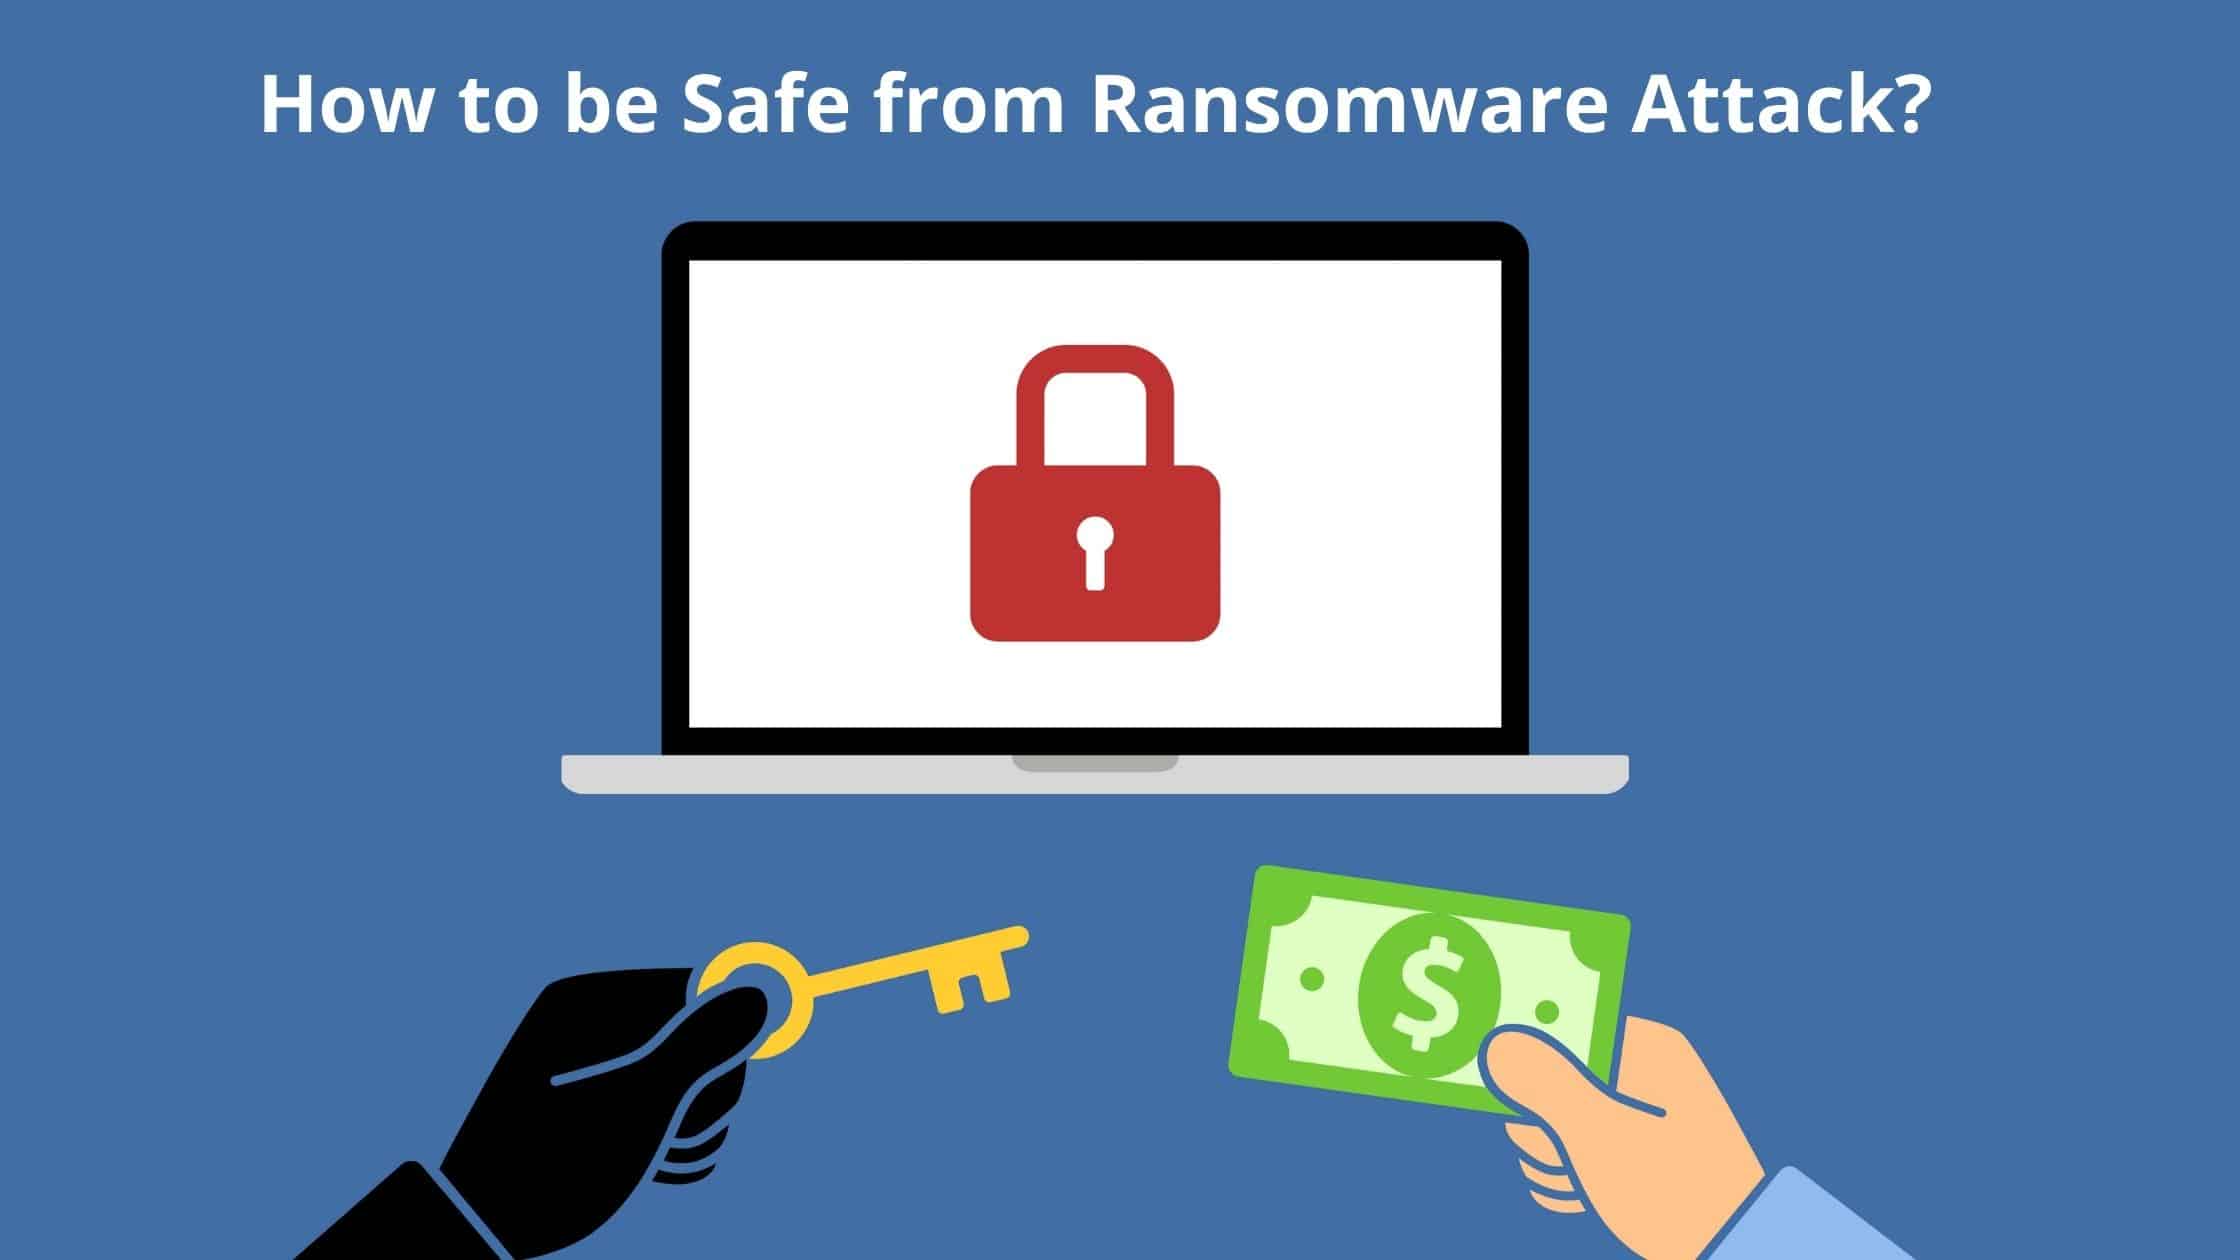 How to be Safe from Ransomware Attack